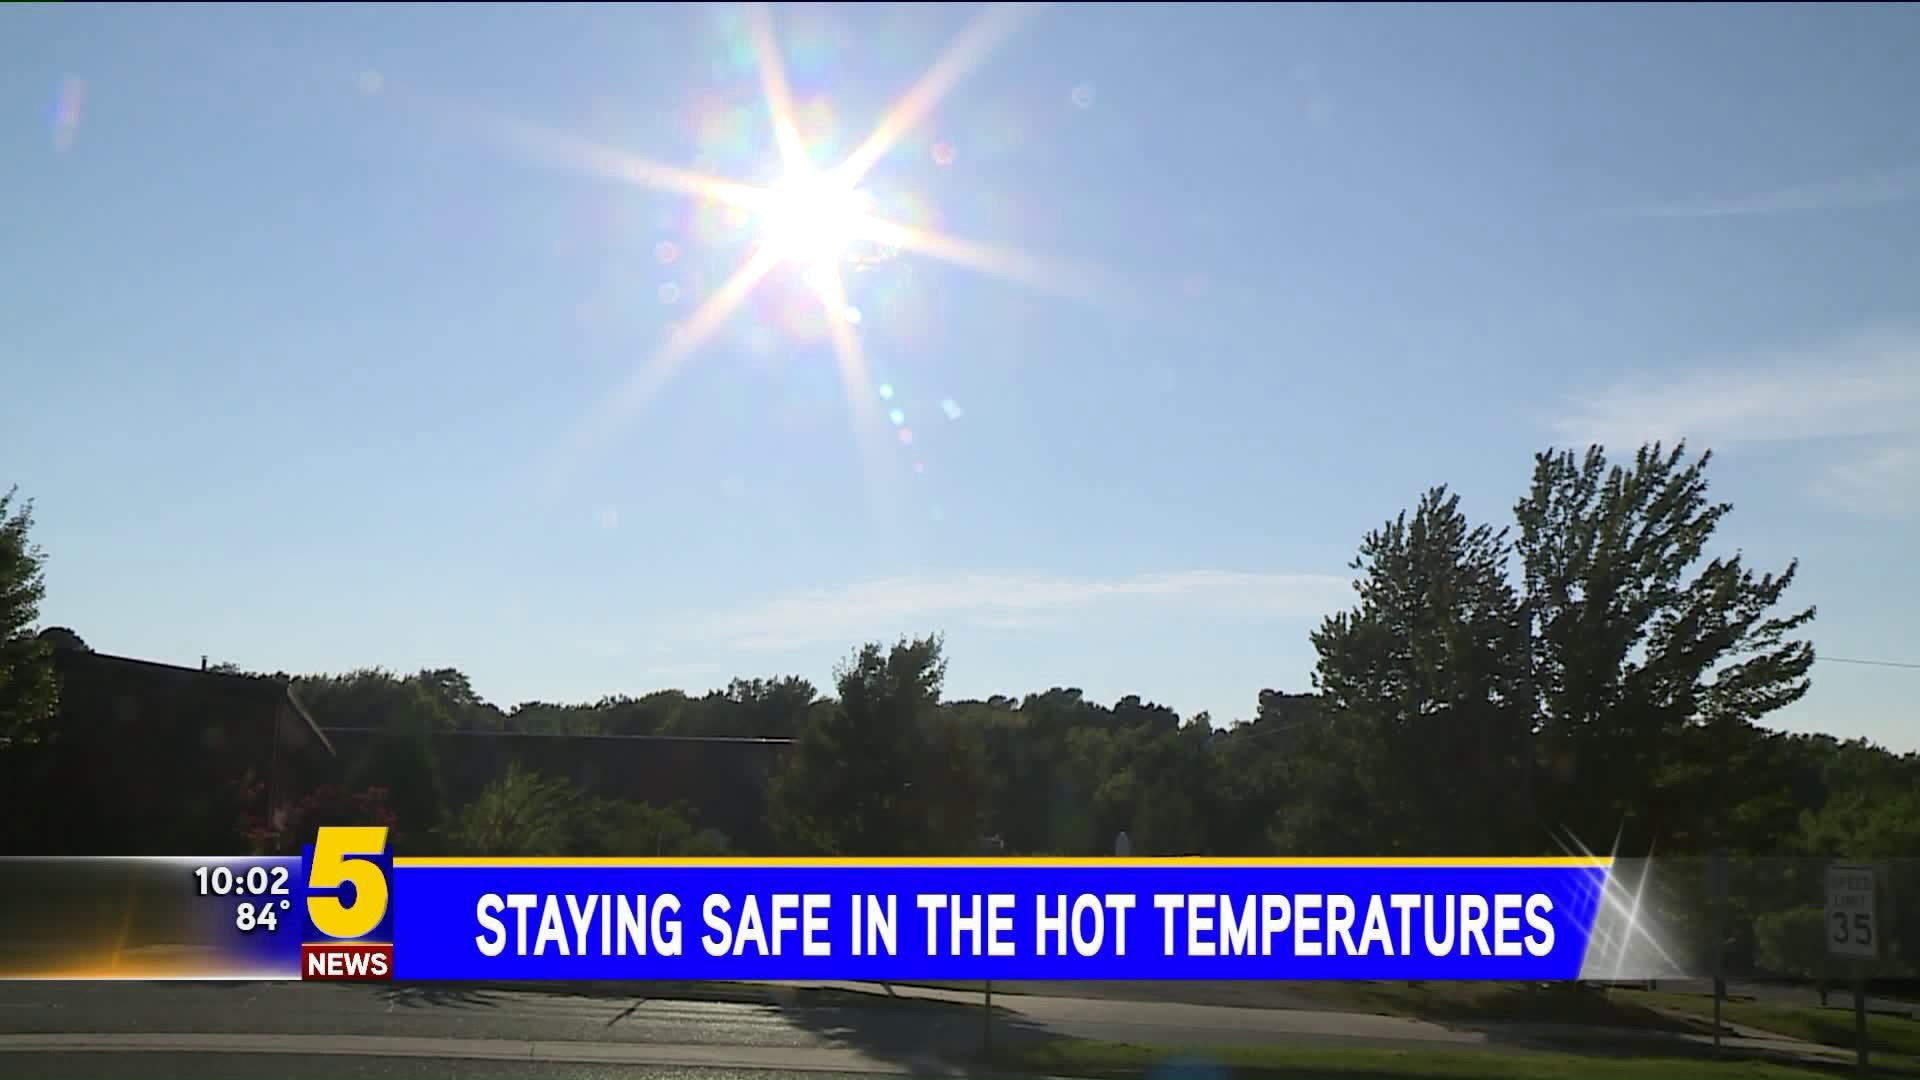 Staying Safe in the Hot Temperatures